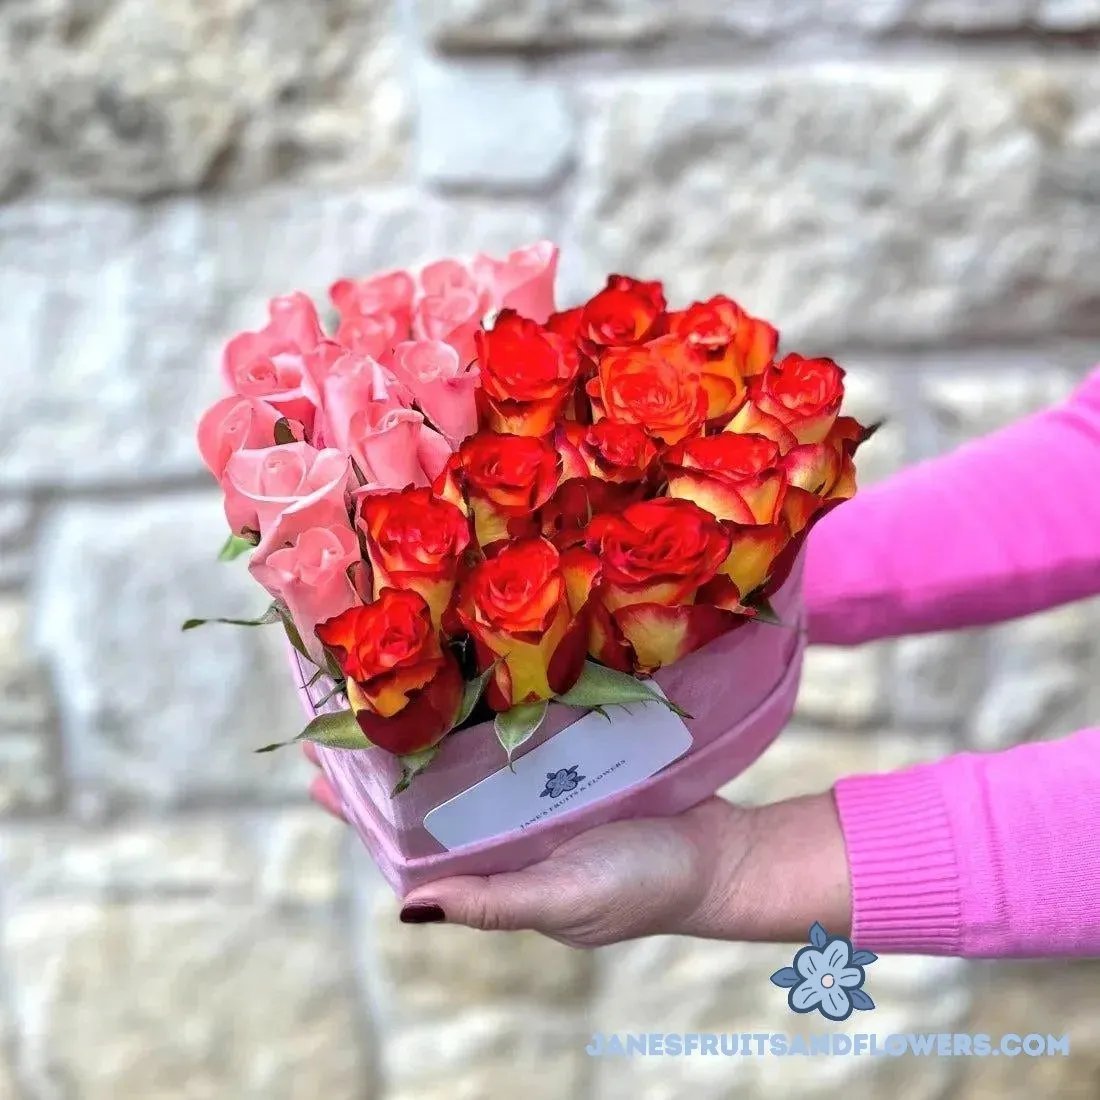 luxury Roses Heart Bouquet - Jane's Fruits And Flowers